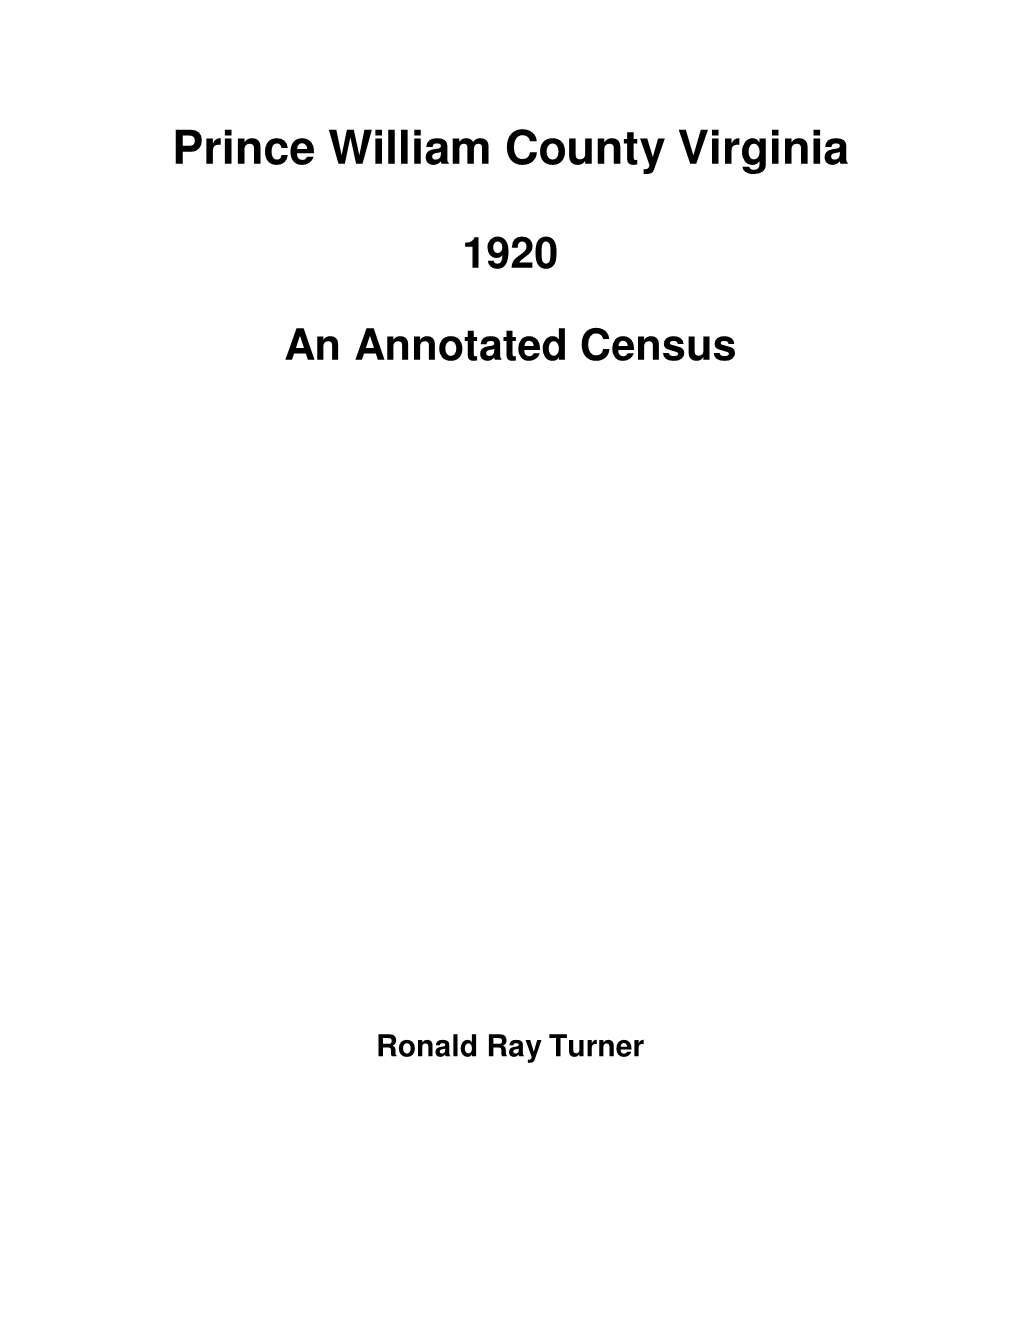 1920 an Annotated Census